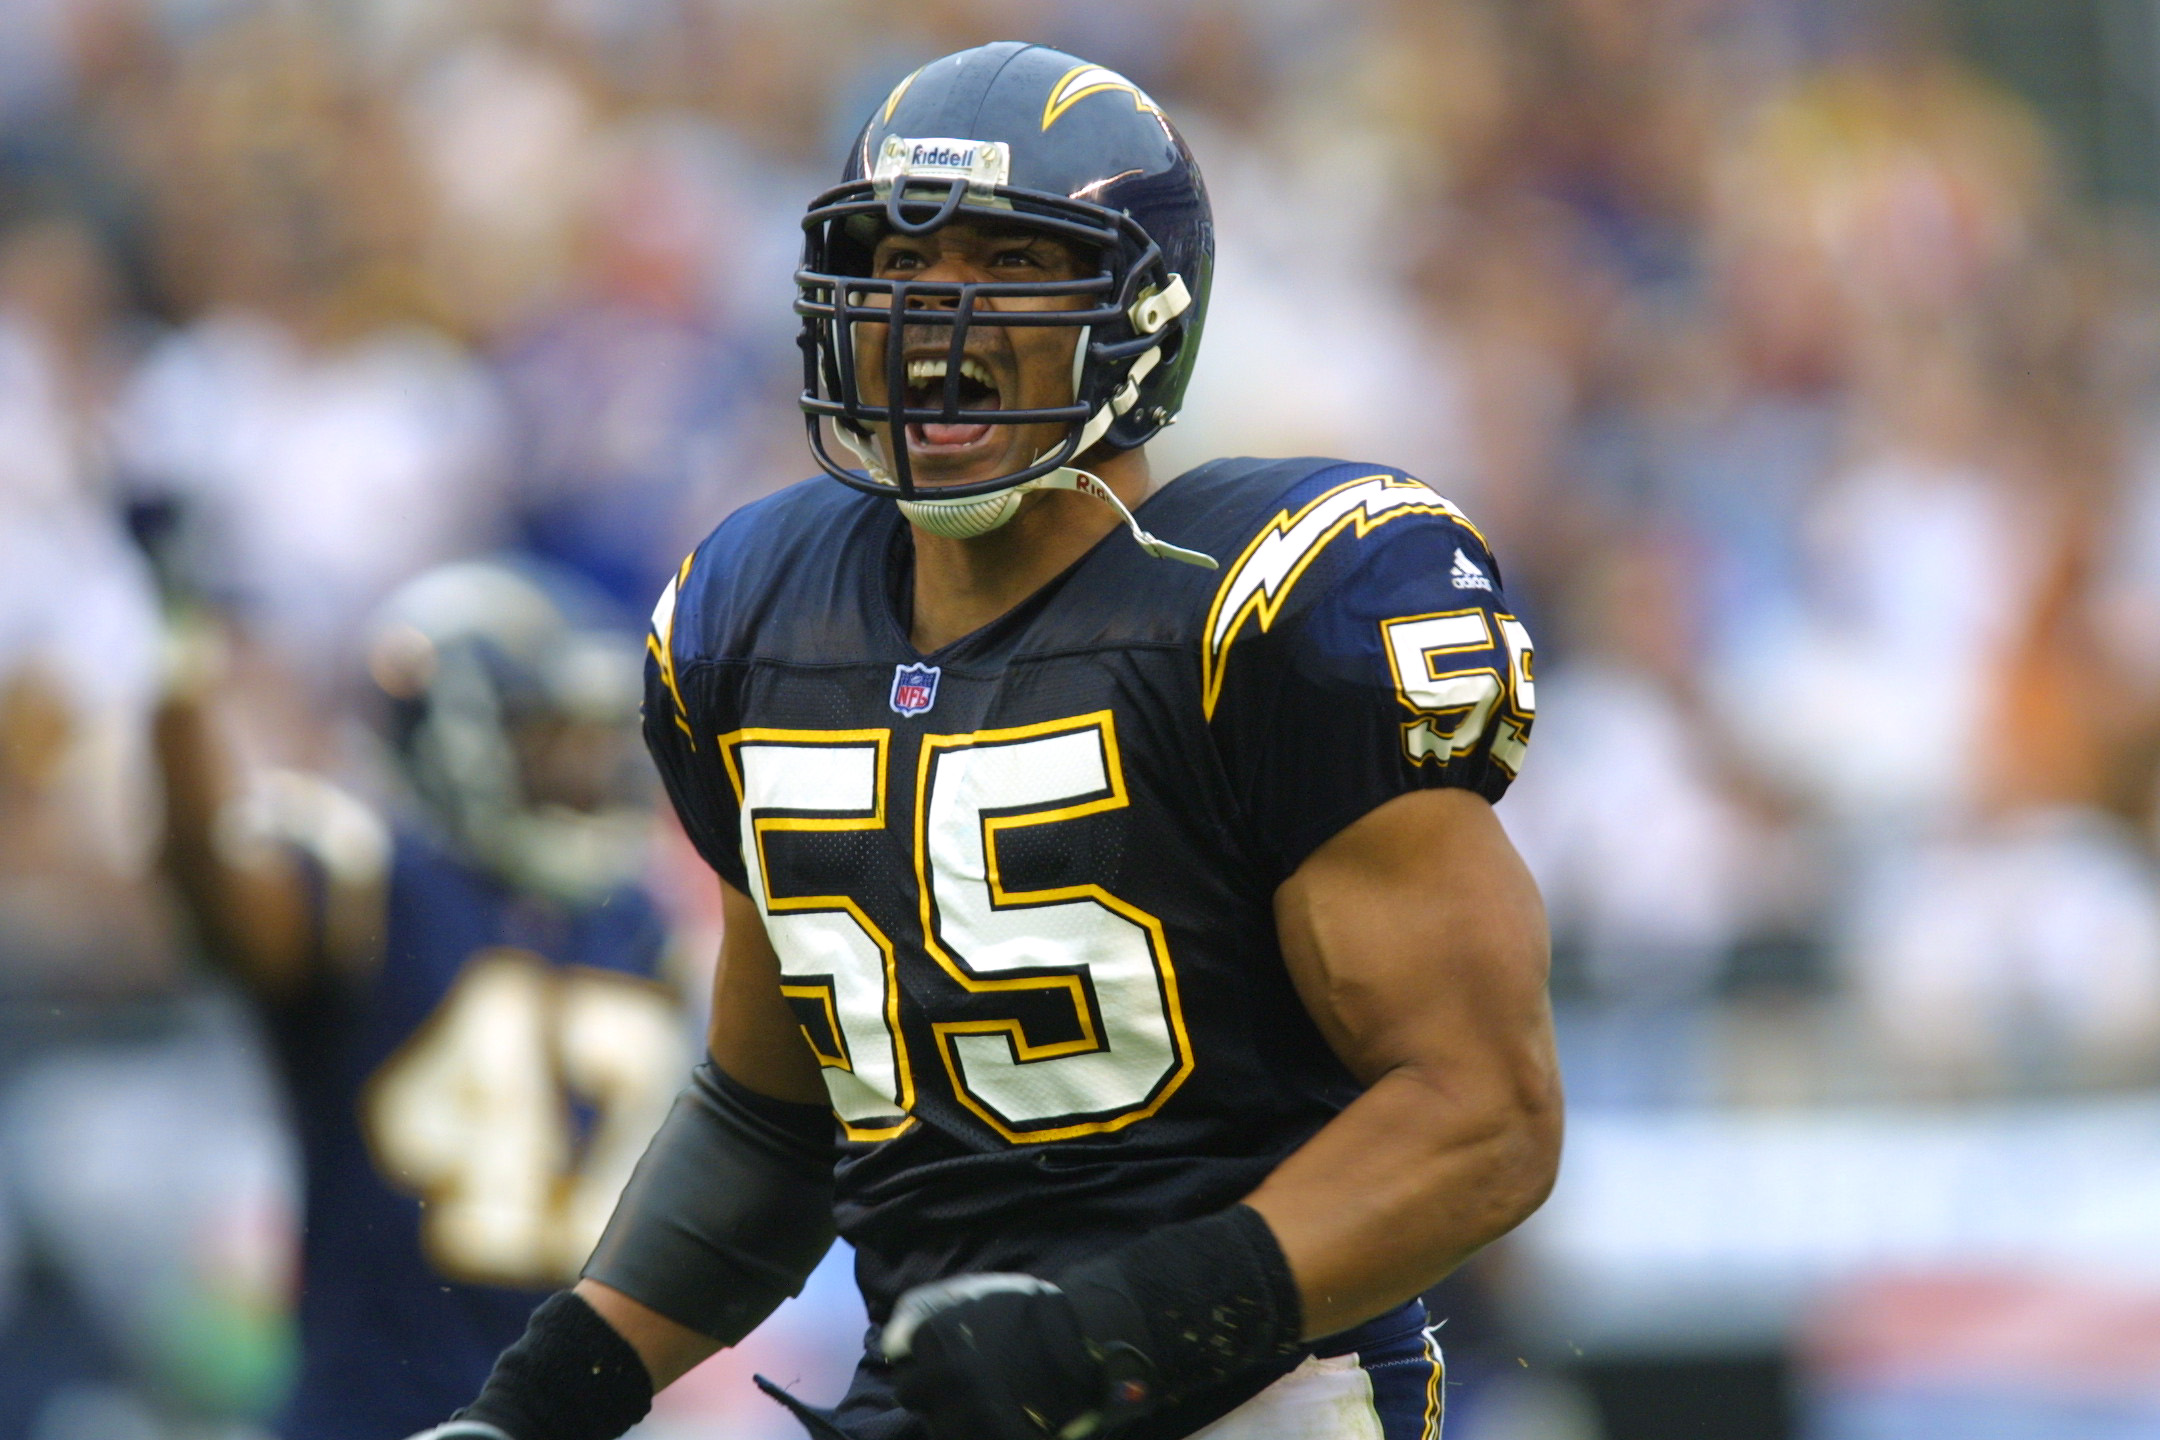 Courtesy of CBS Sports: Hard to argue against Seau as a top-10 LB of all-time. 